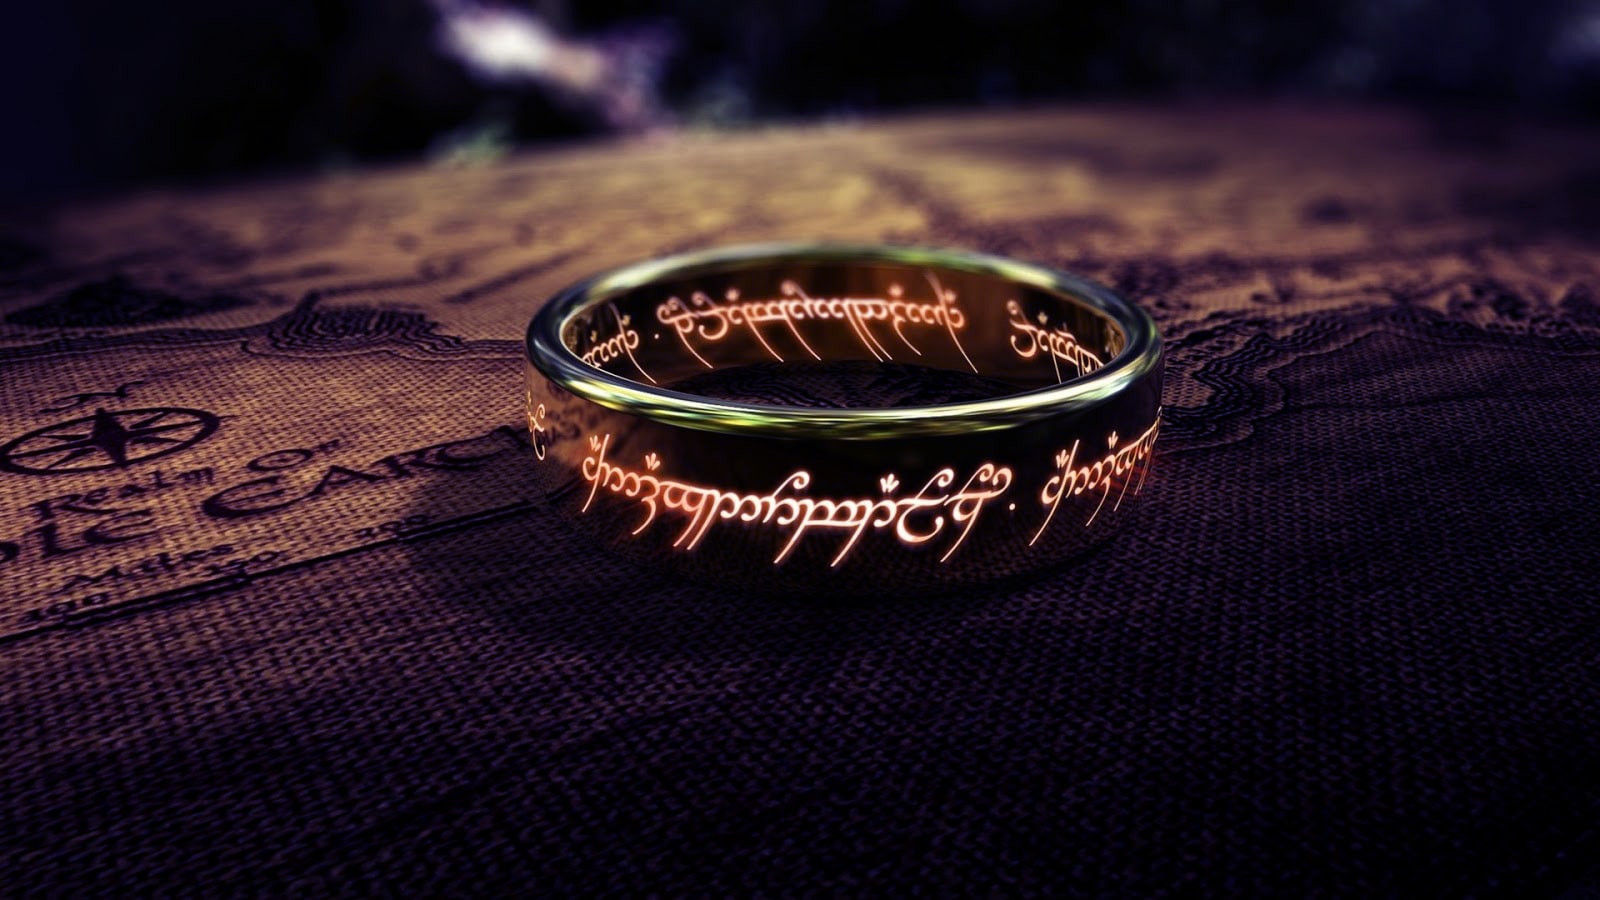 Lord of the Rings Wallpaper